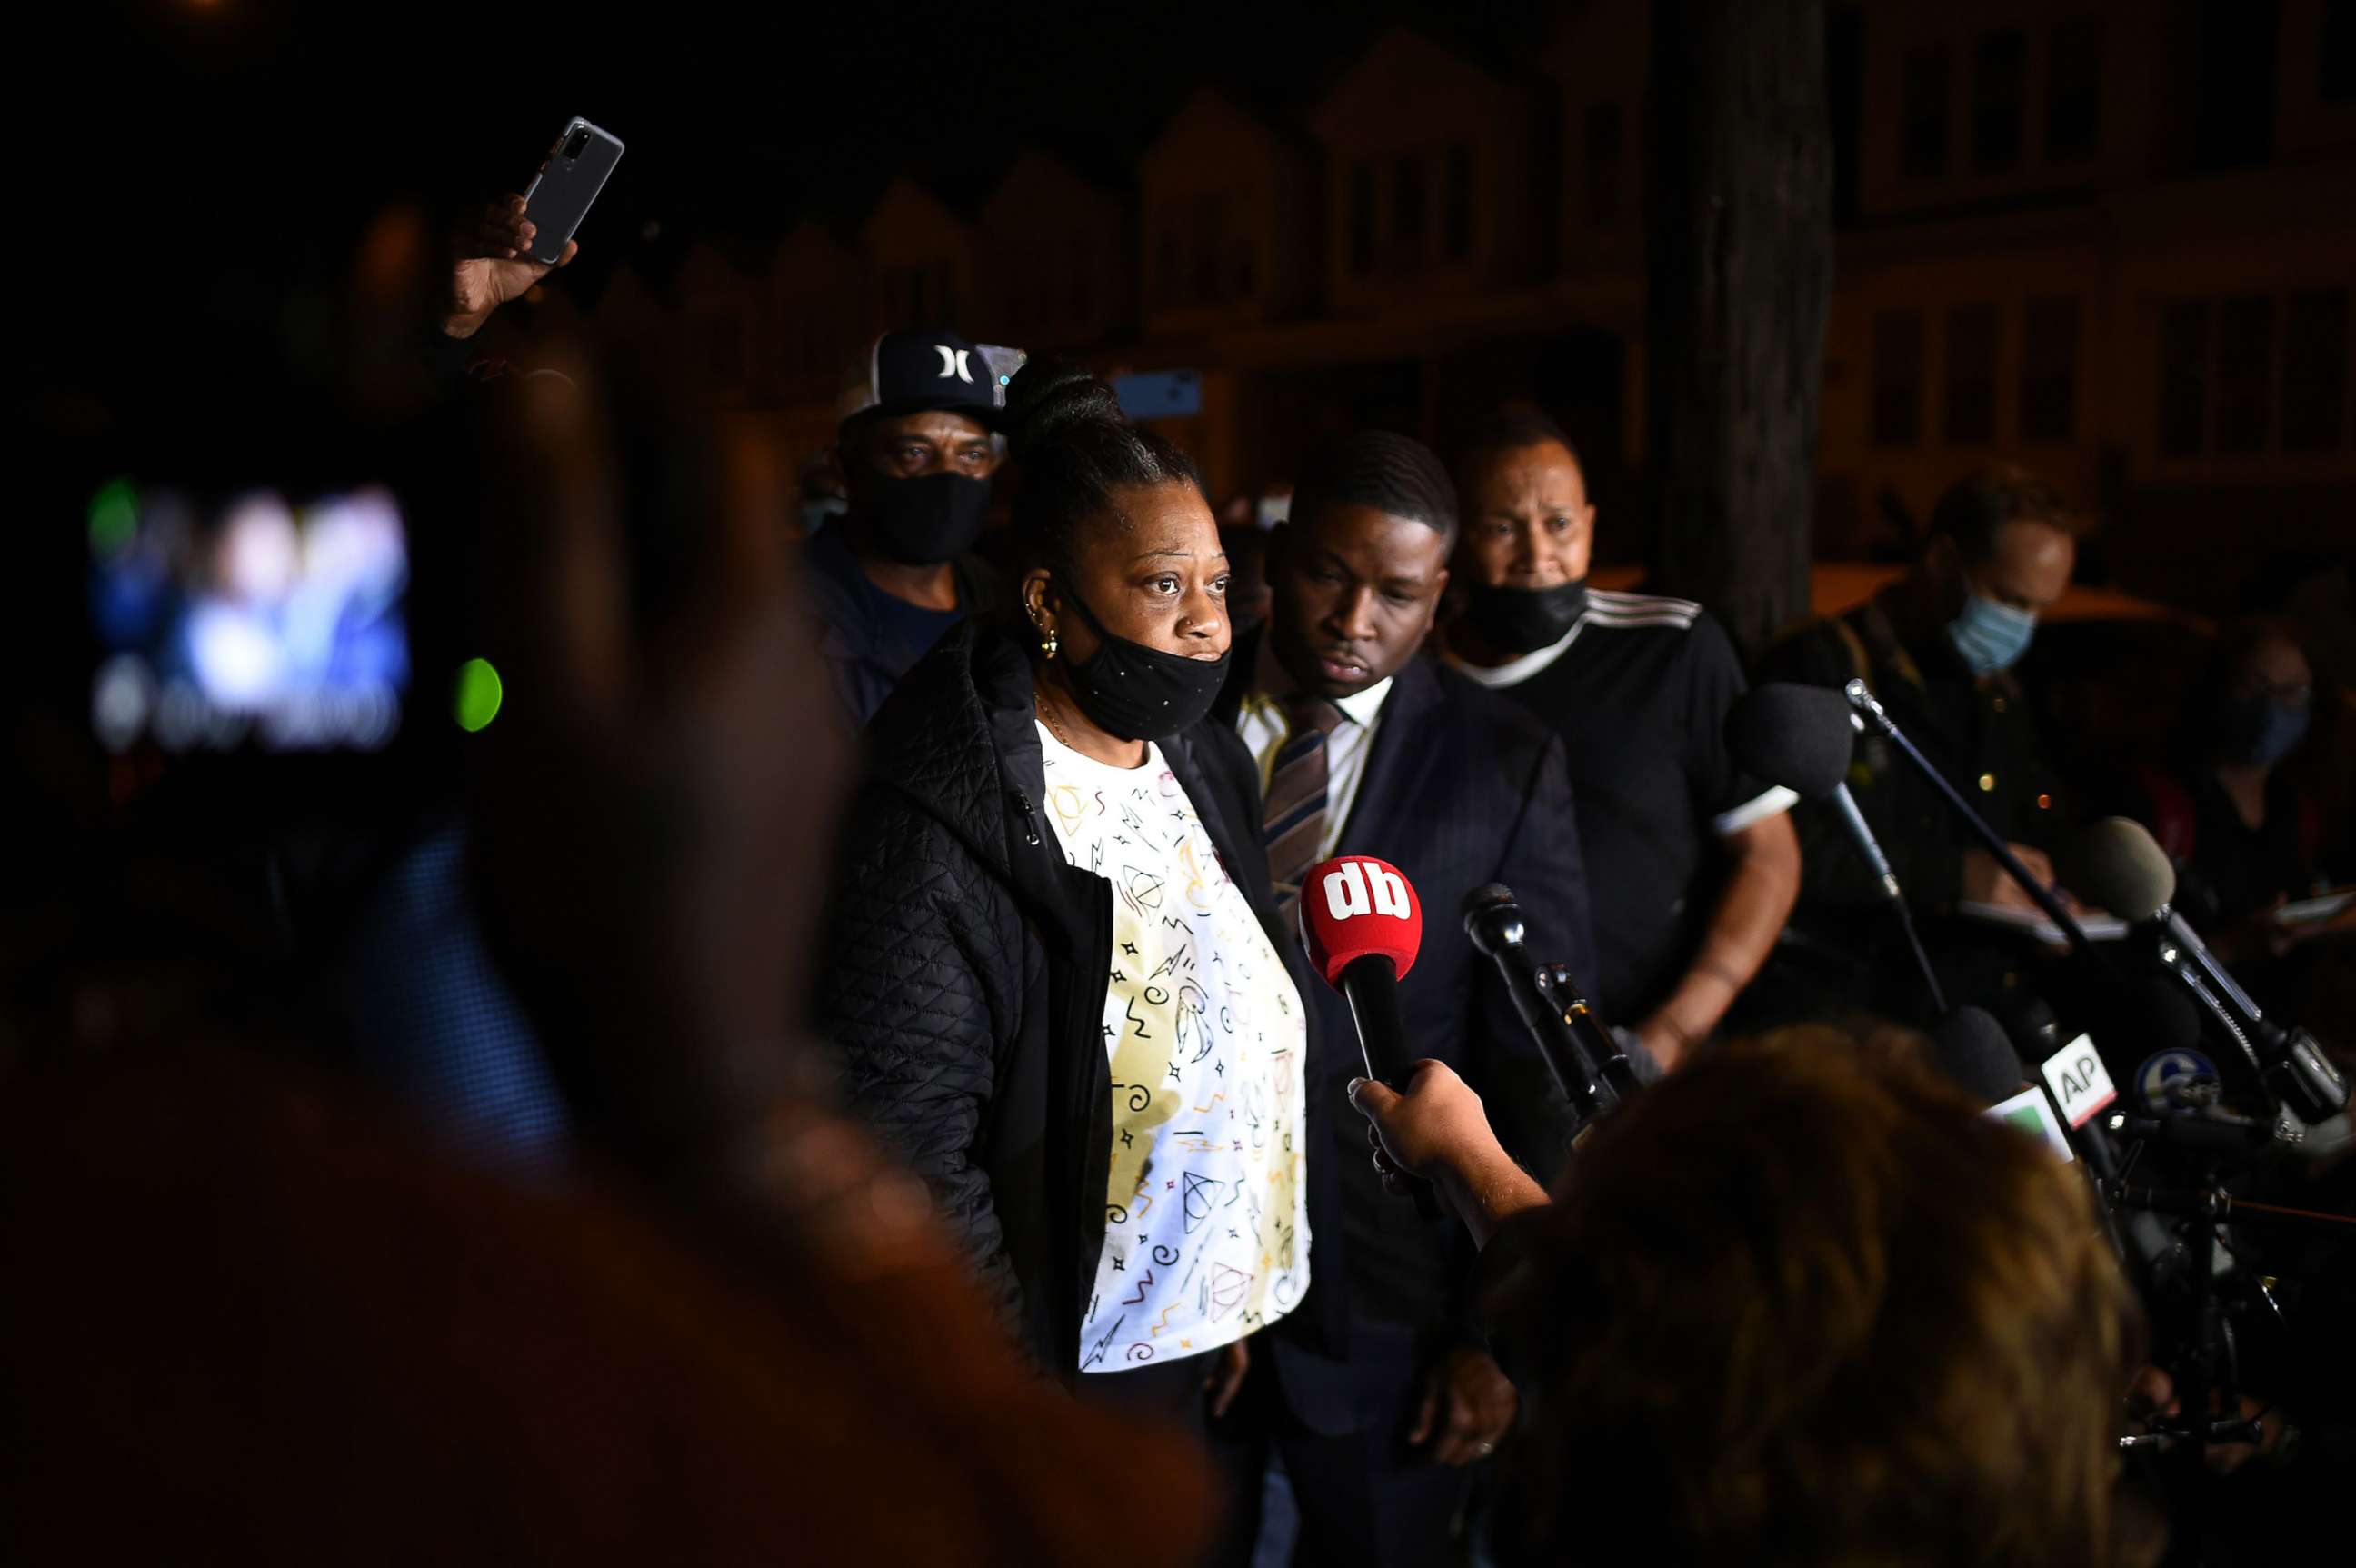 PHOTO: Walter Wallace, Jr.'s mother speaks to the press on Oct. 27, 2020 in Philadelphia, about the police killing of her son the previous day. Protesters gathered for a march over the death of Wallace.